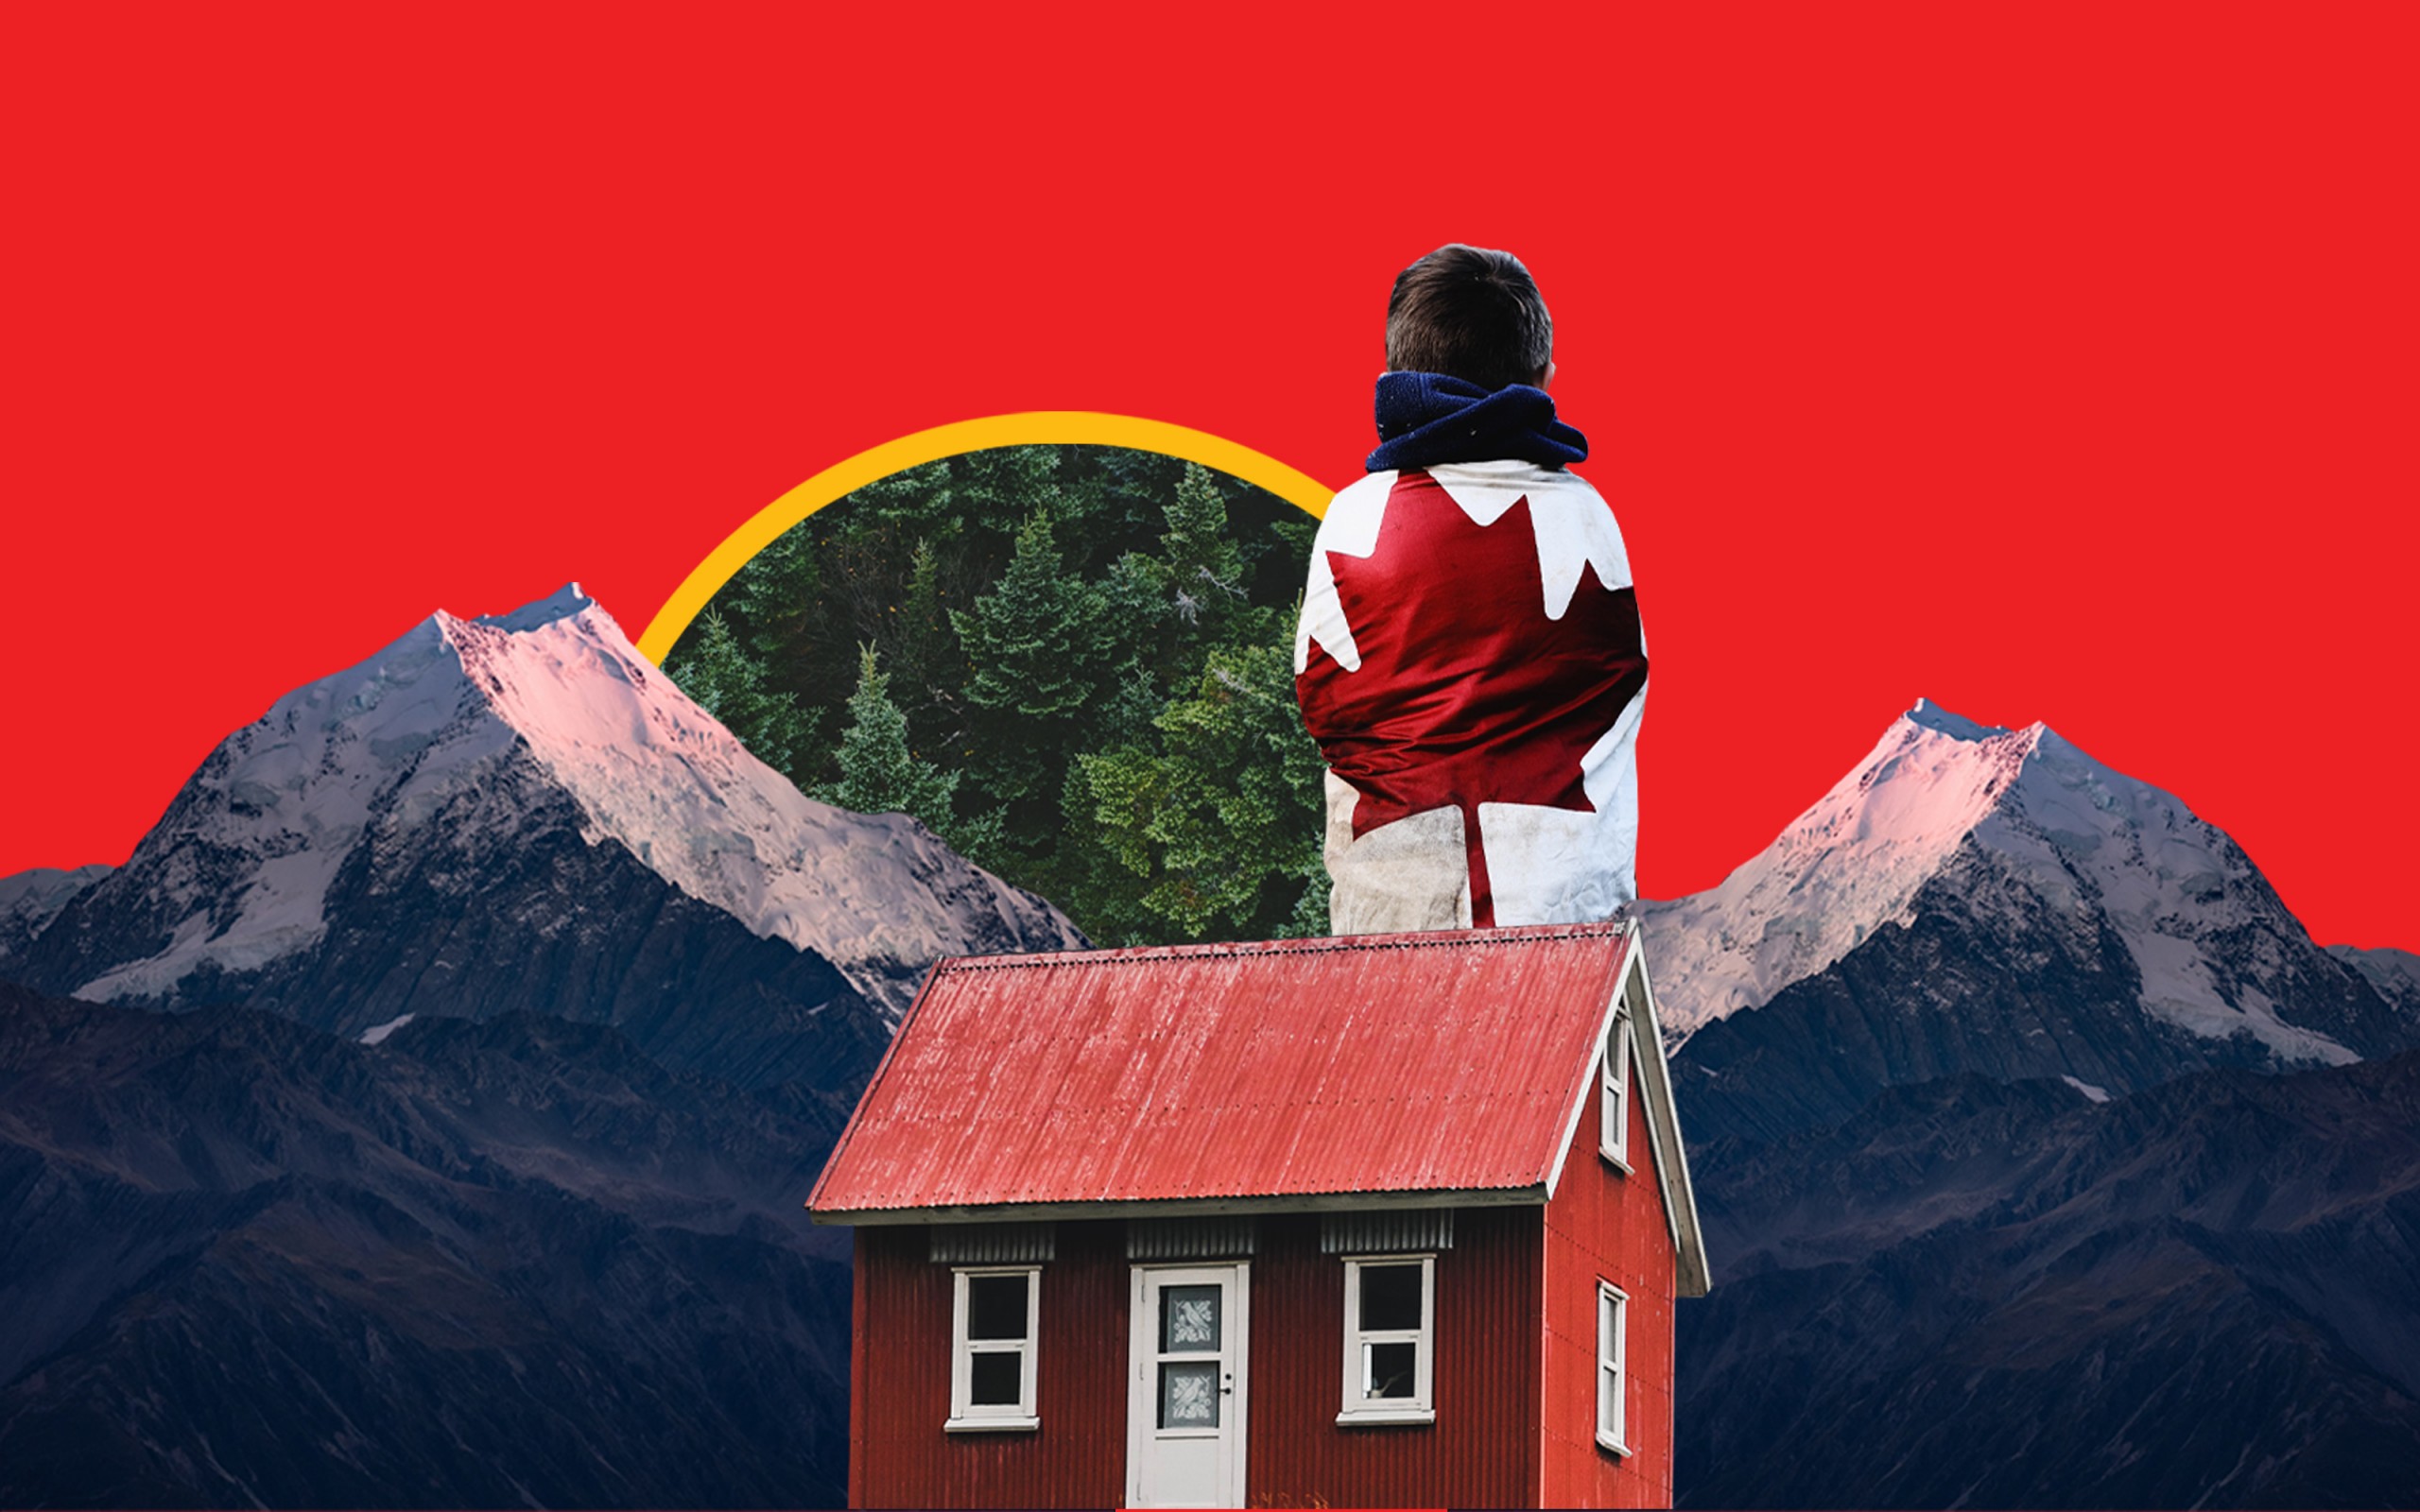 A collage of a red cabin, mountains, forests and a person wrapped in a Canadian flag.